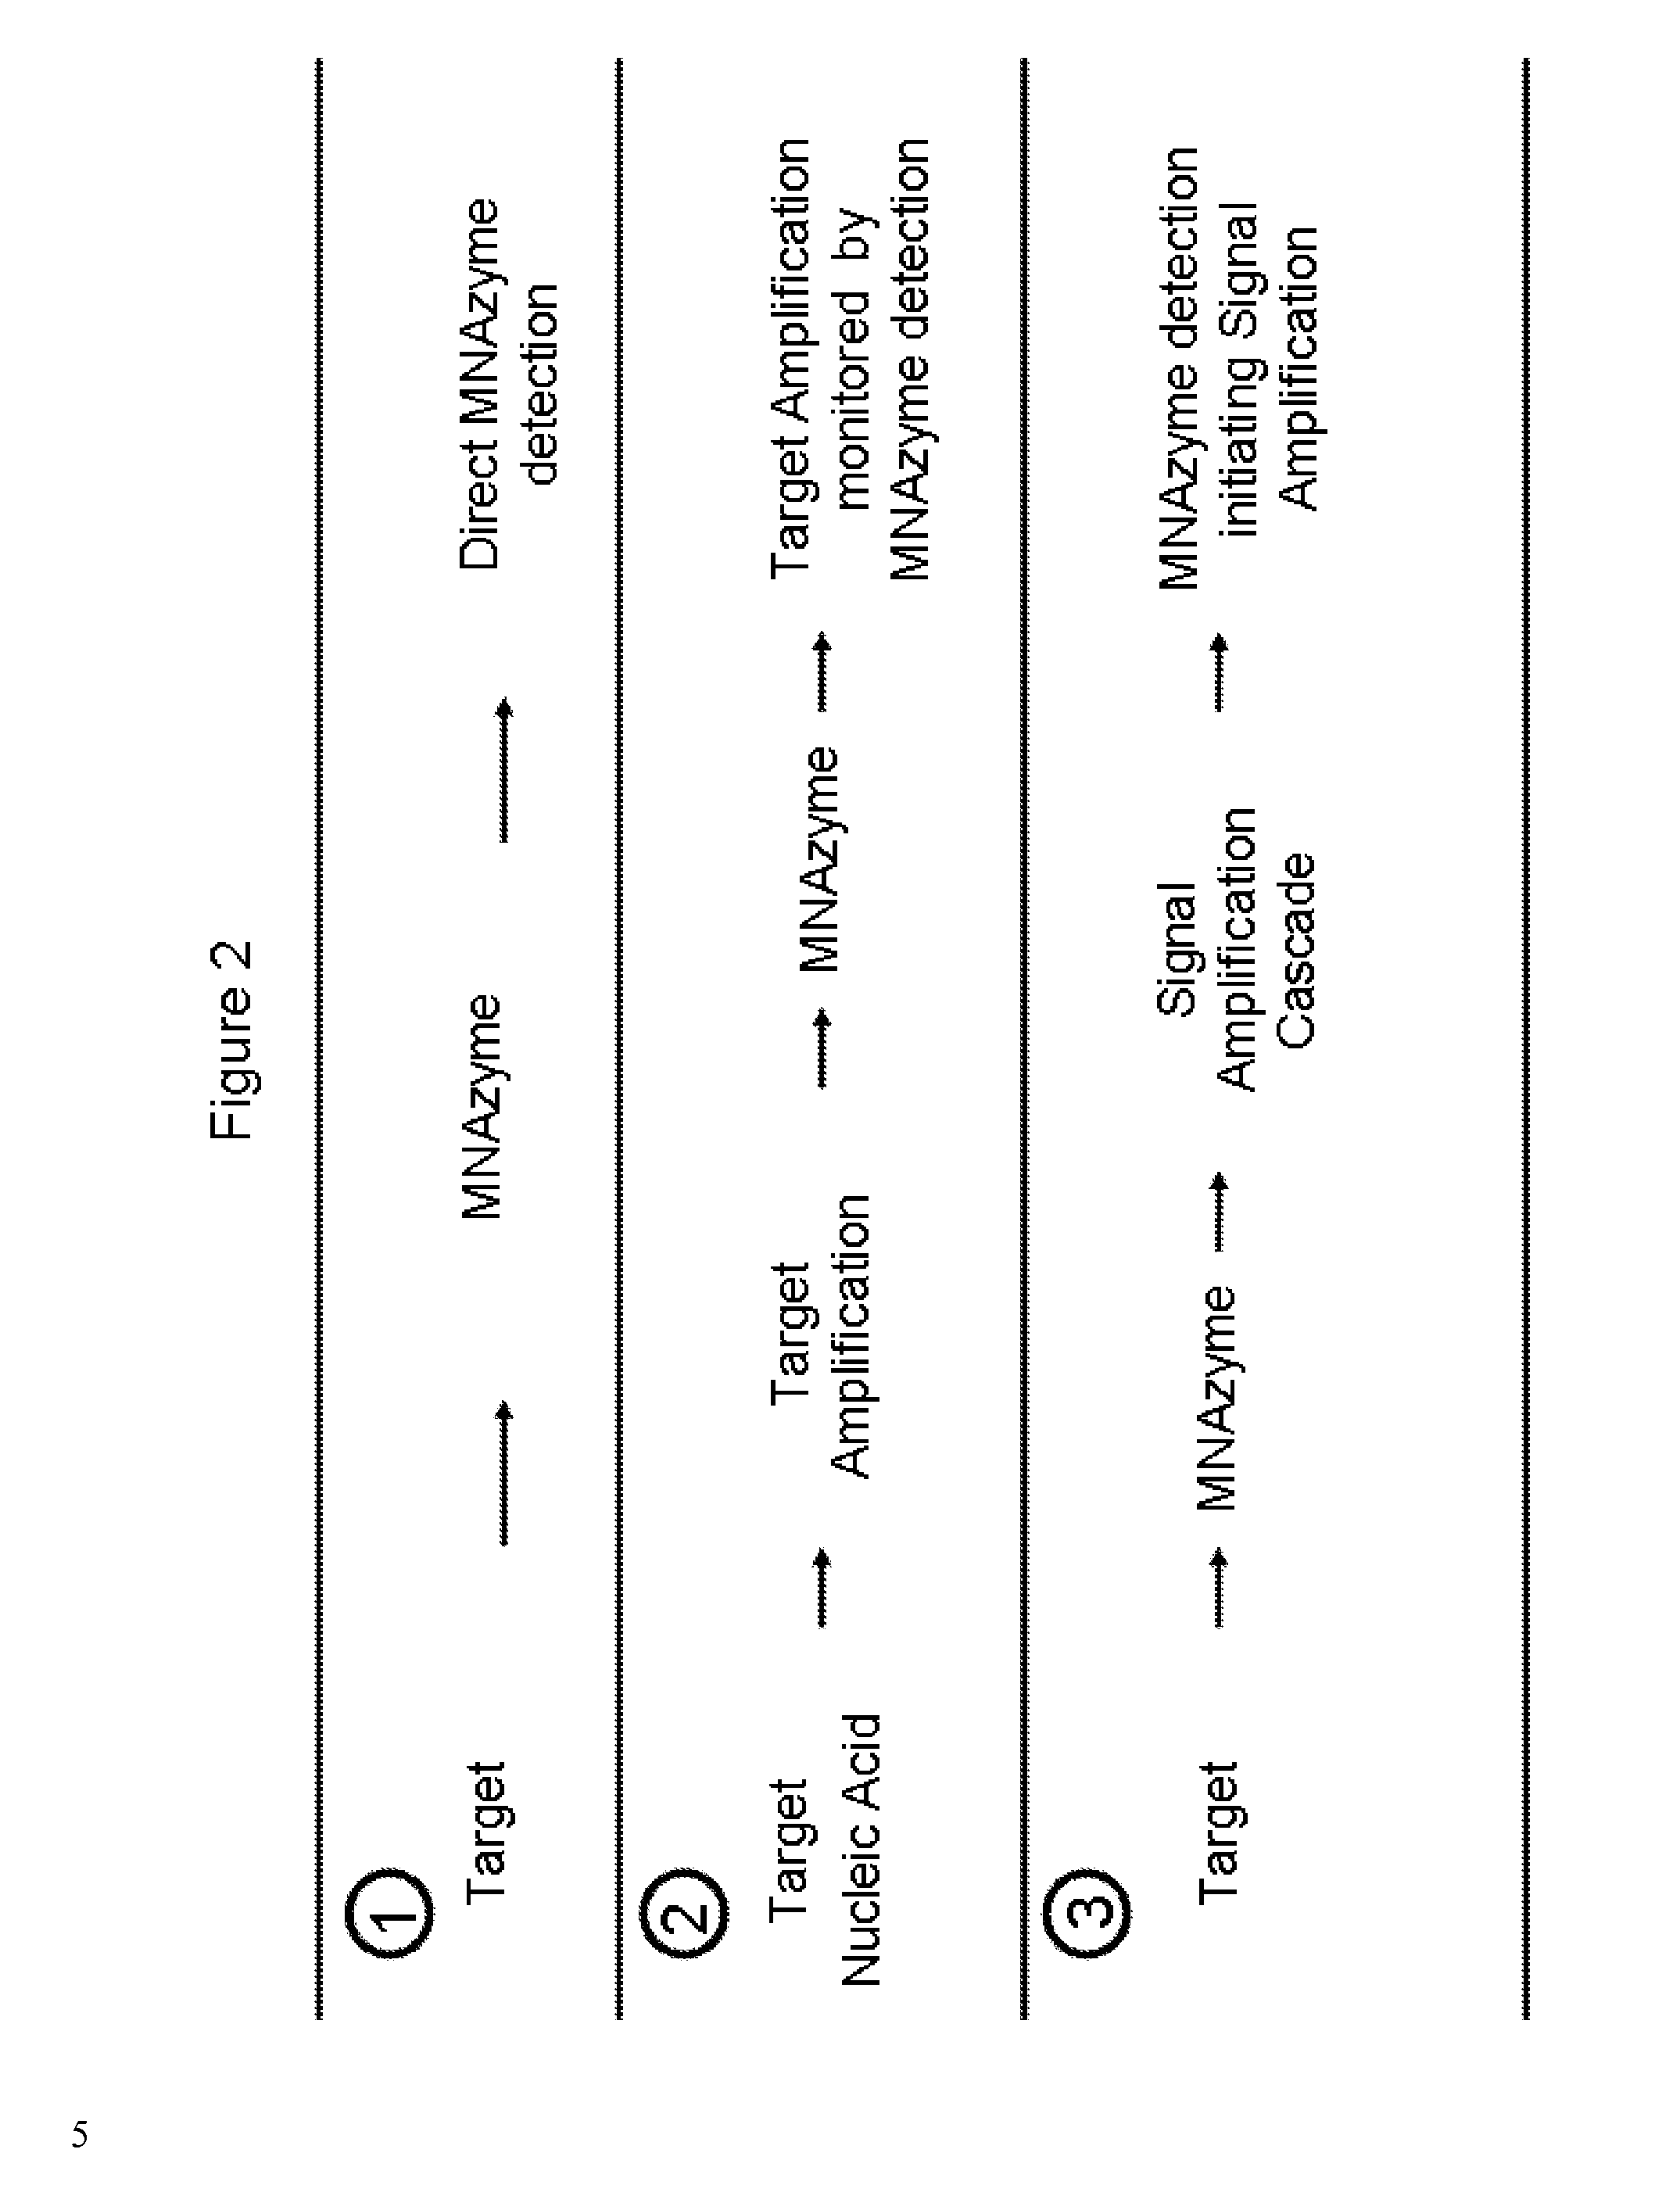 Multicomponent nucleic acid enzymes with cleavage, ligase or other activity and methods for their use